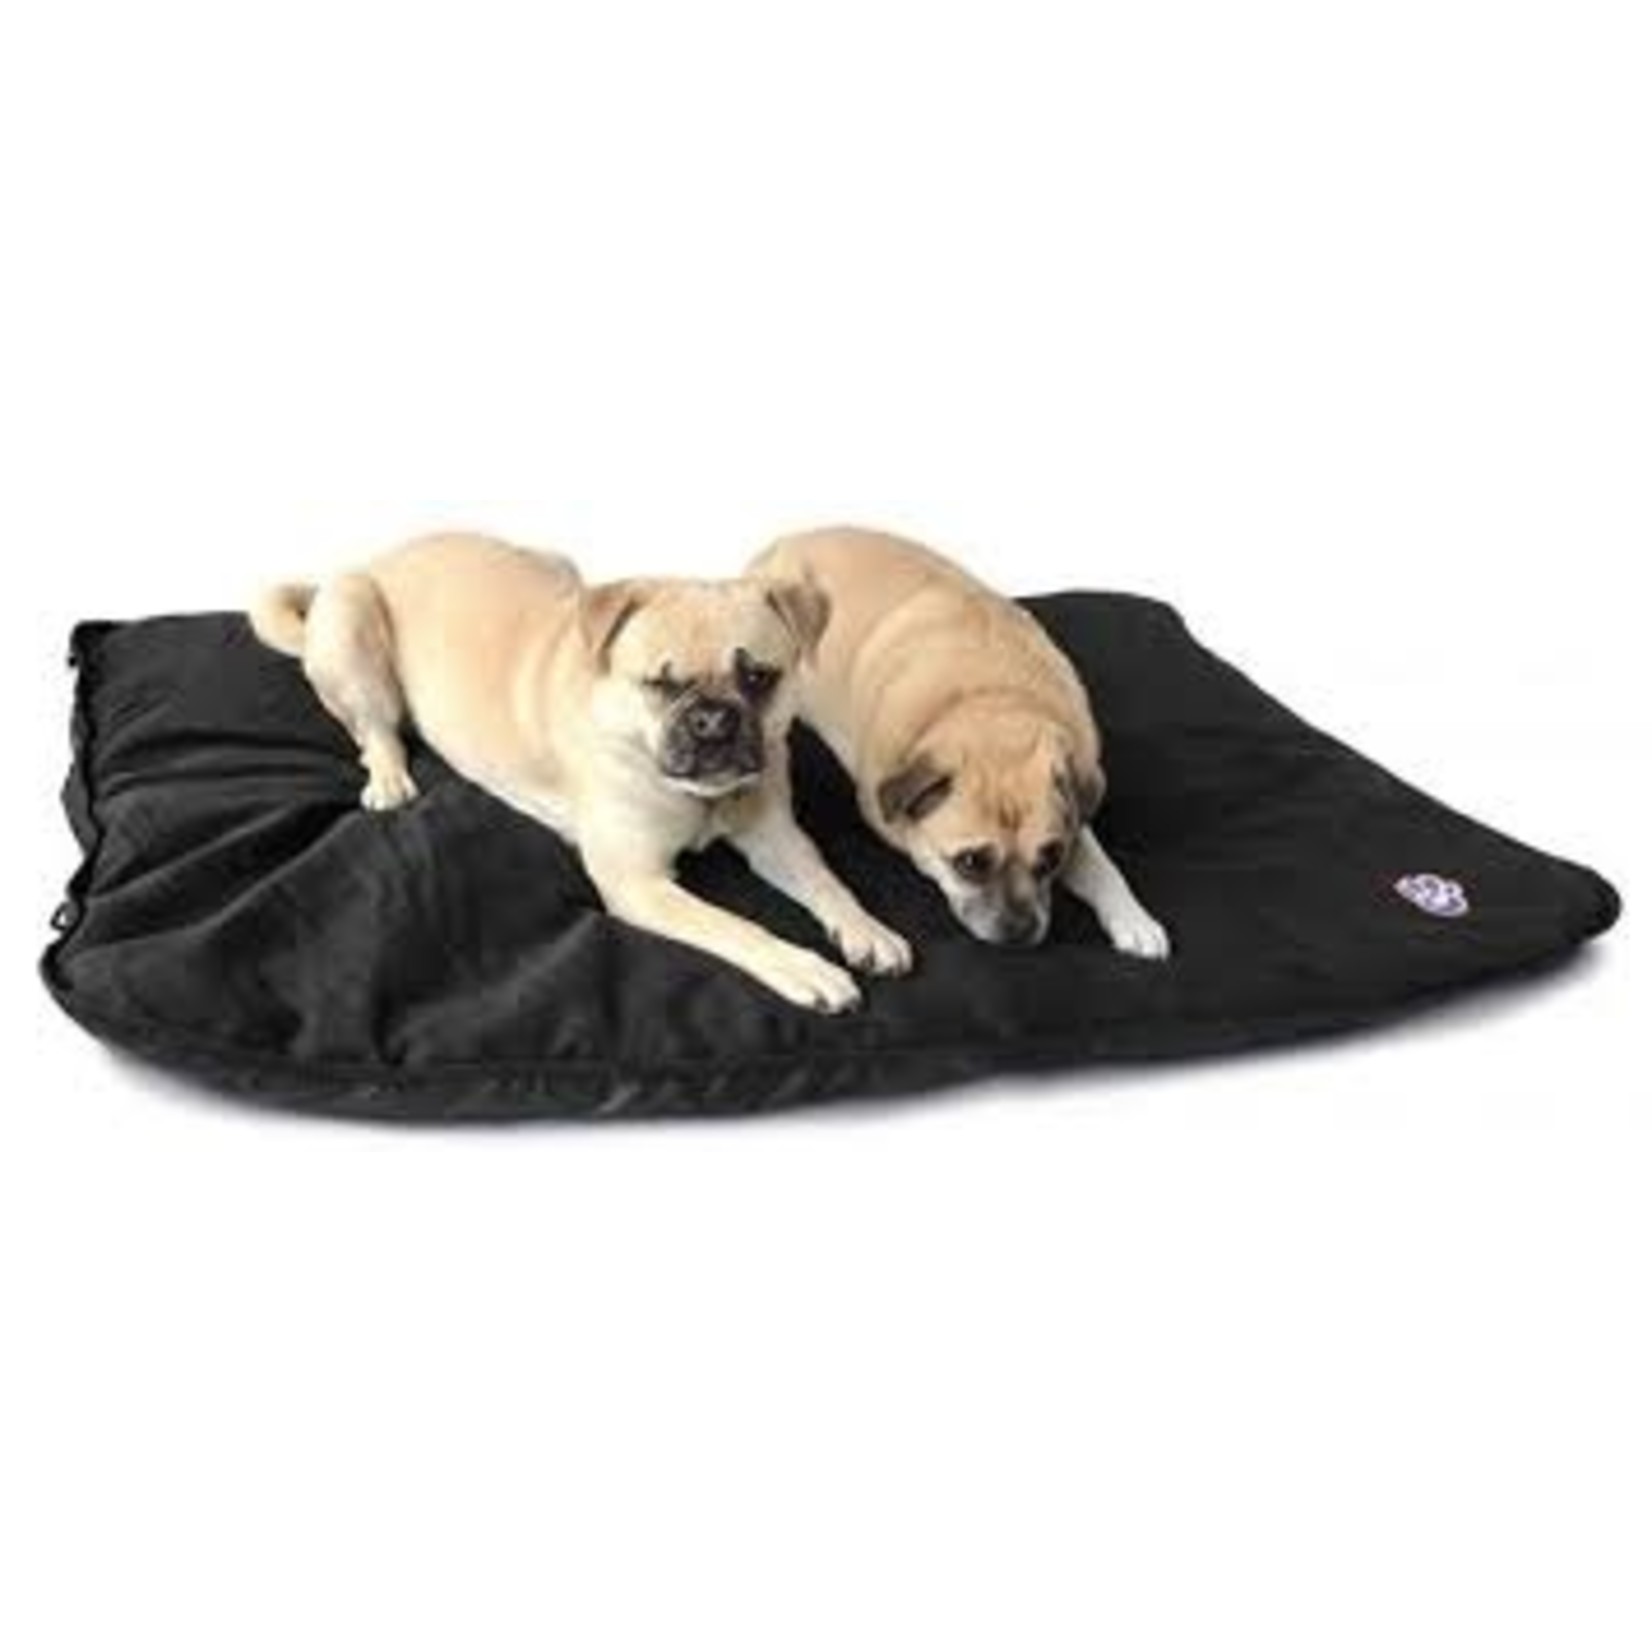 Canada Pooch Canada Pooch - Travel Bed Rugged Rest to Go